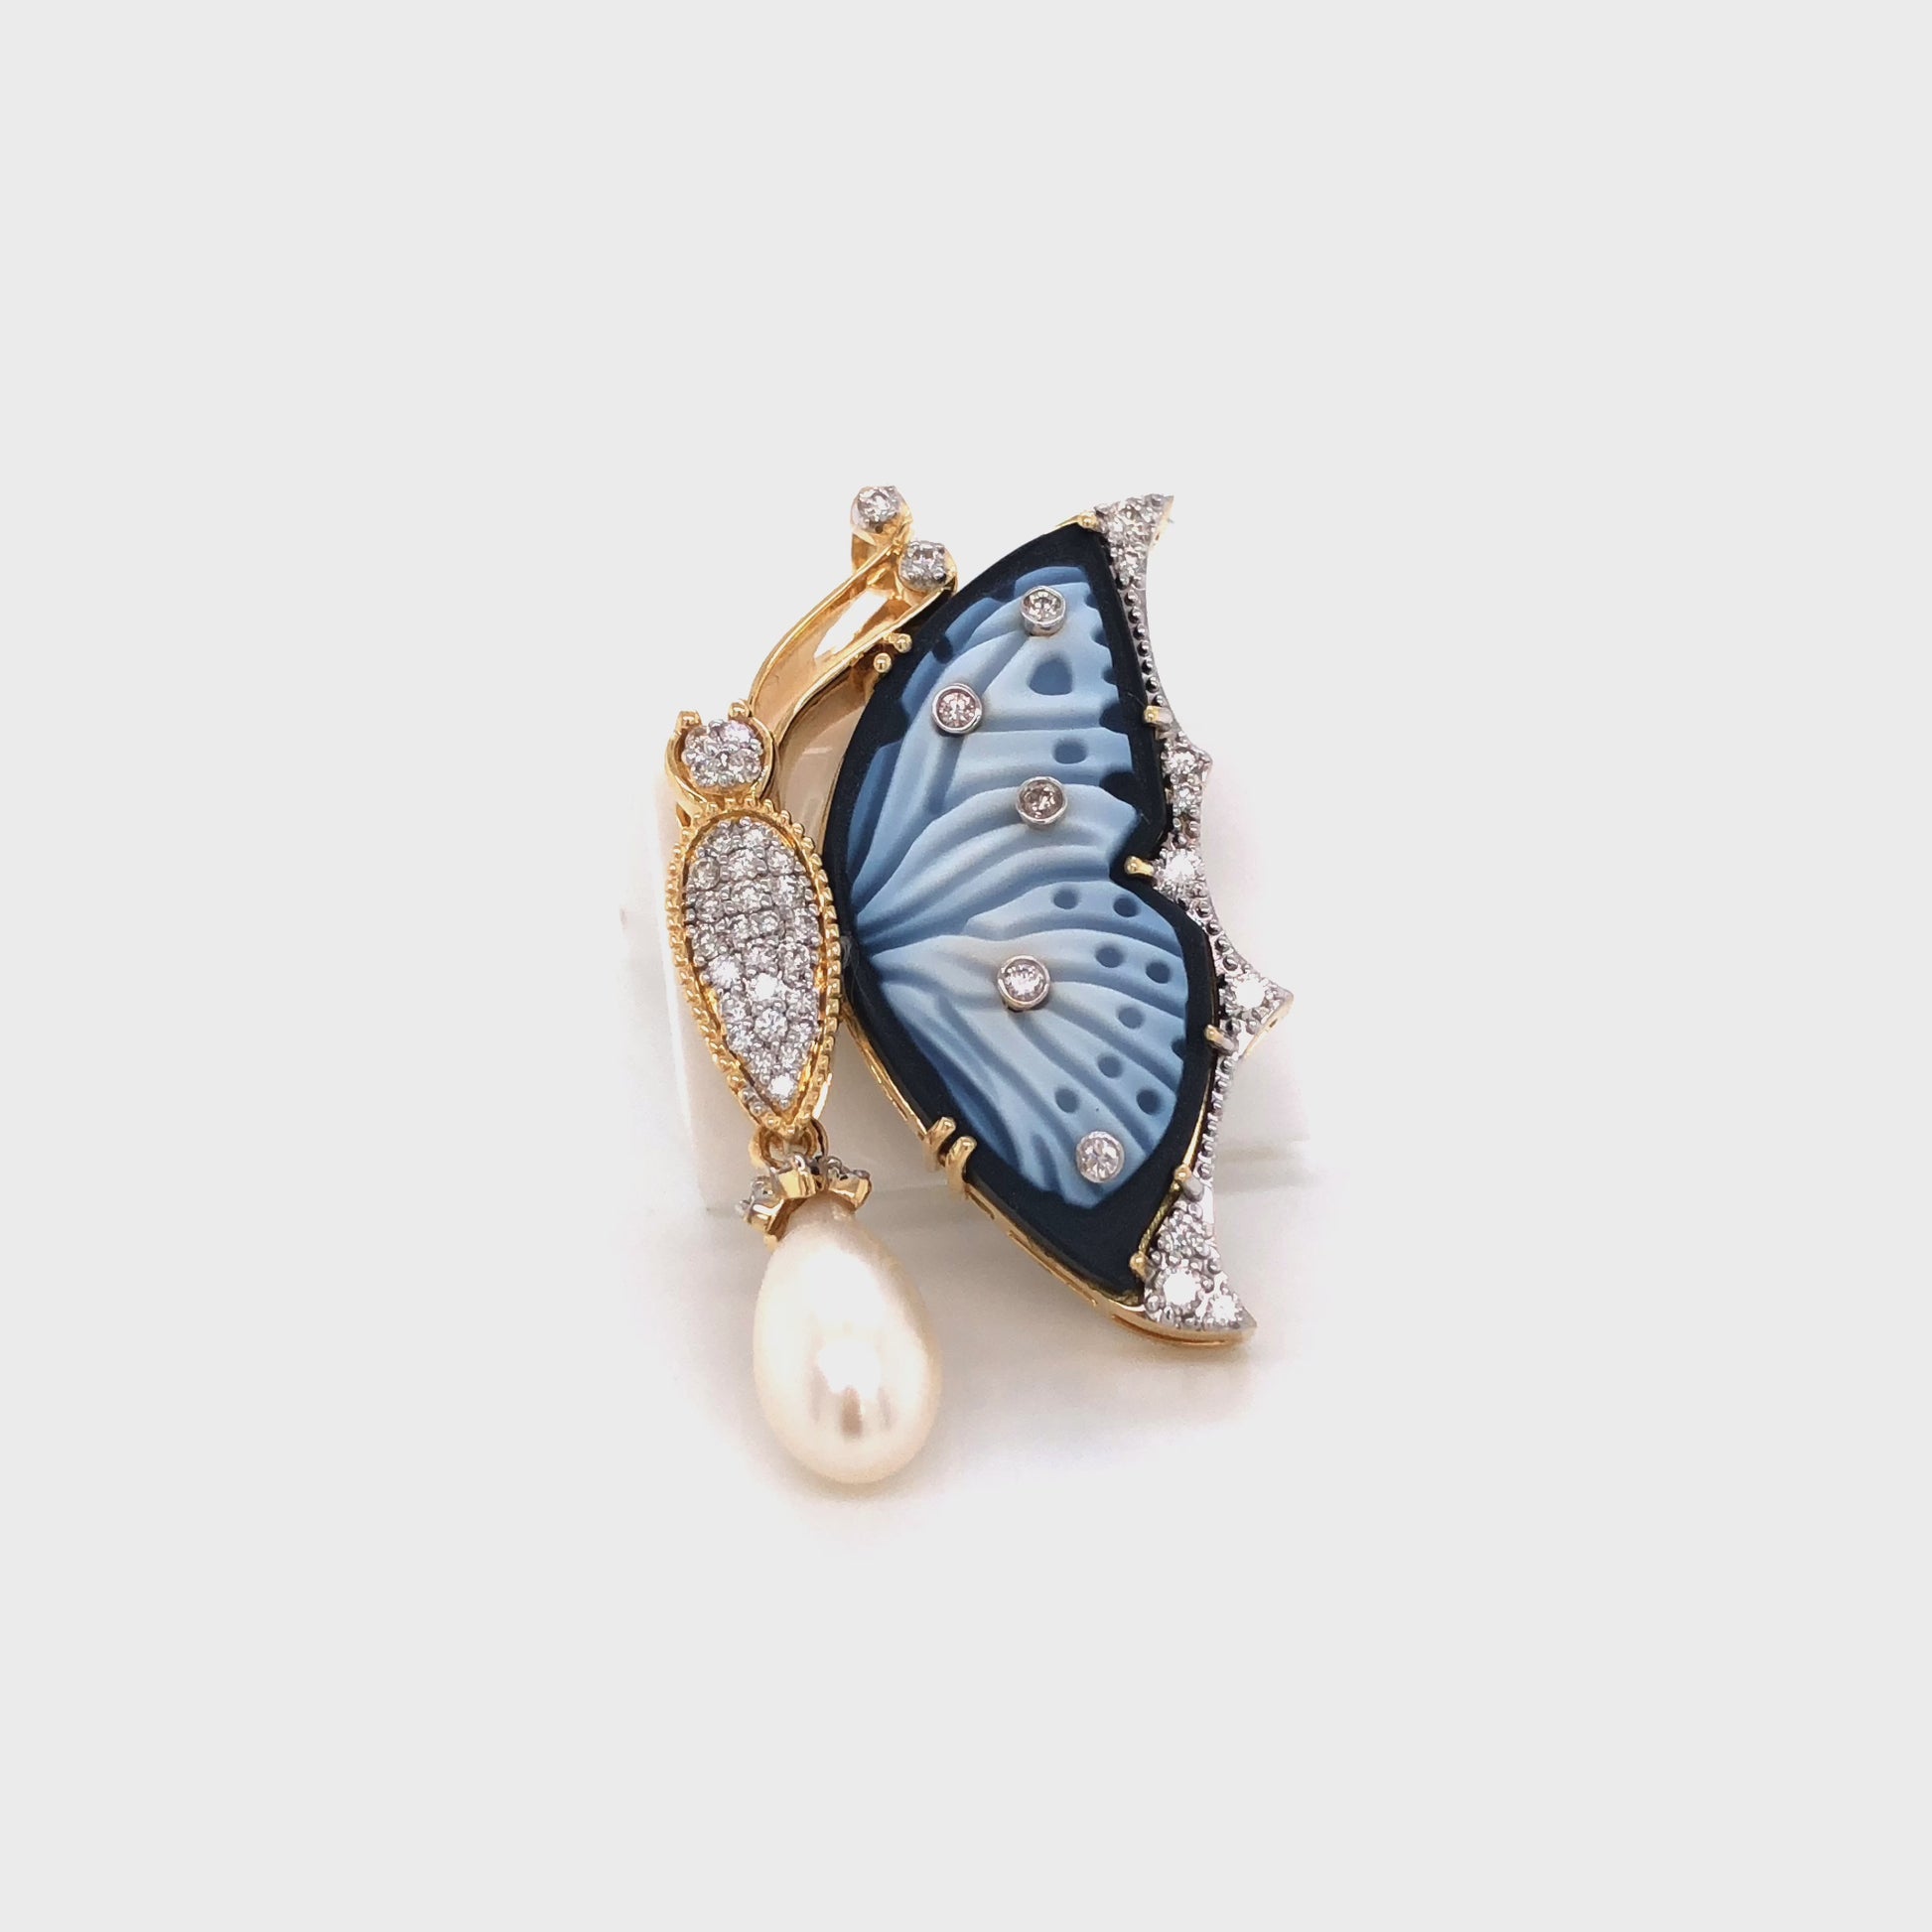 Delicate butterfly brooch with pearl